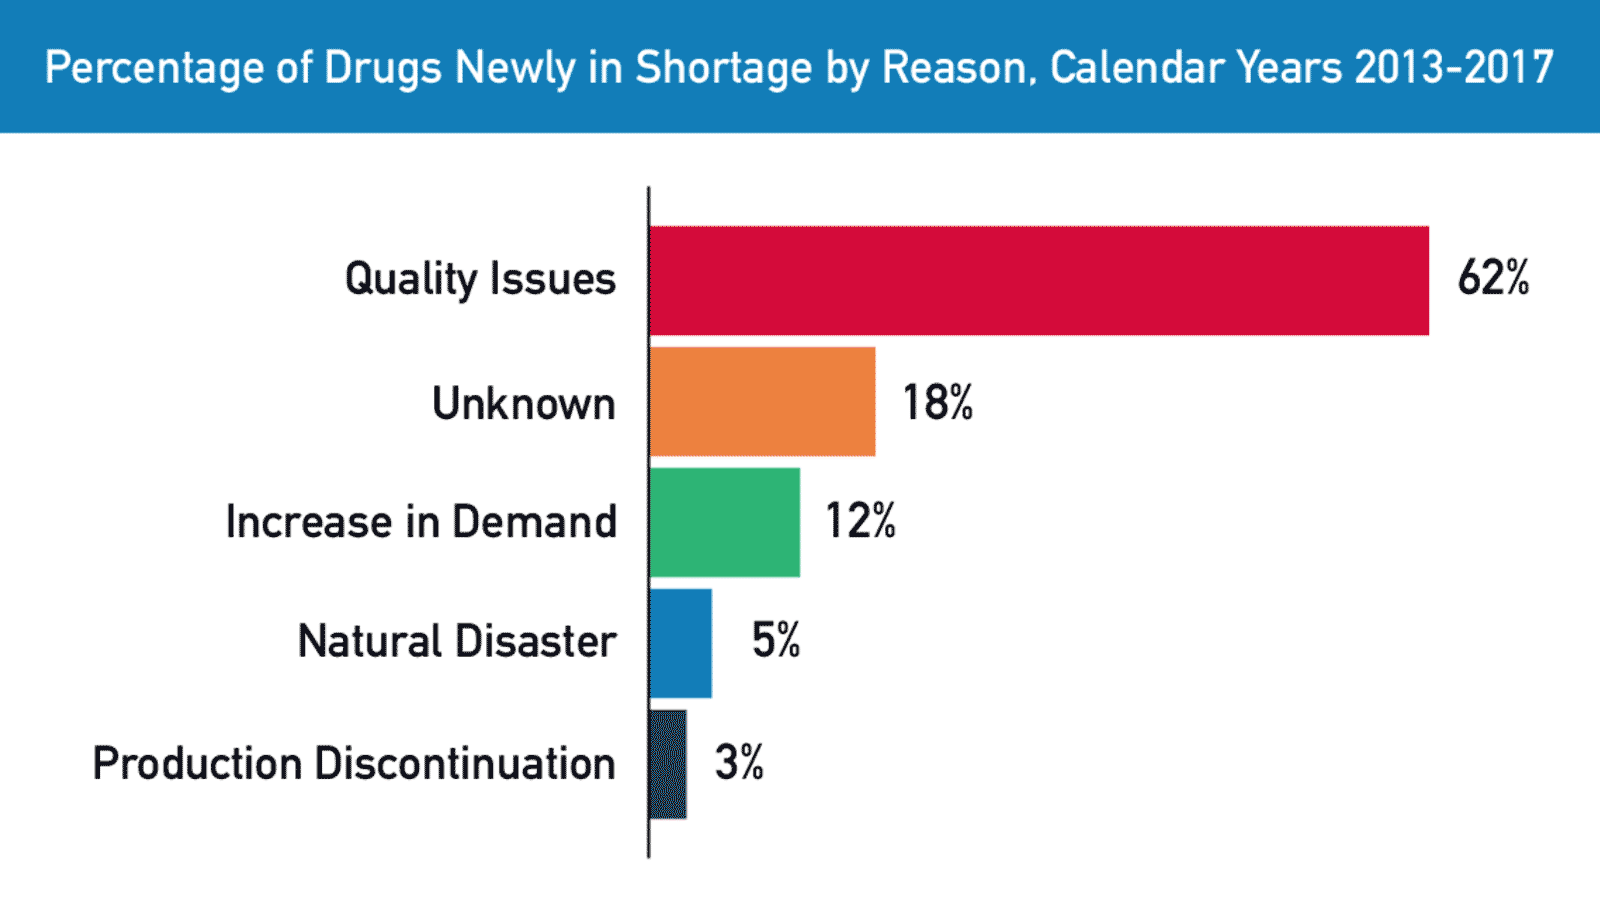 Percentage of Drugs Newly in Shortage by Reason, 2013 - 2014